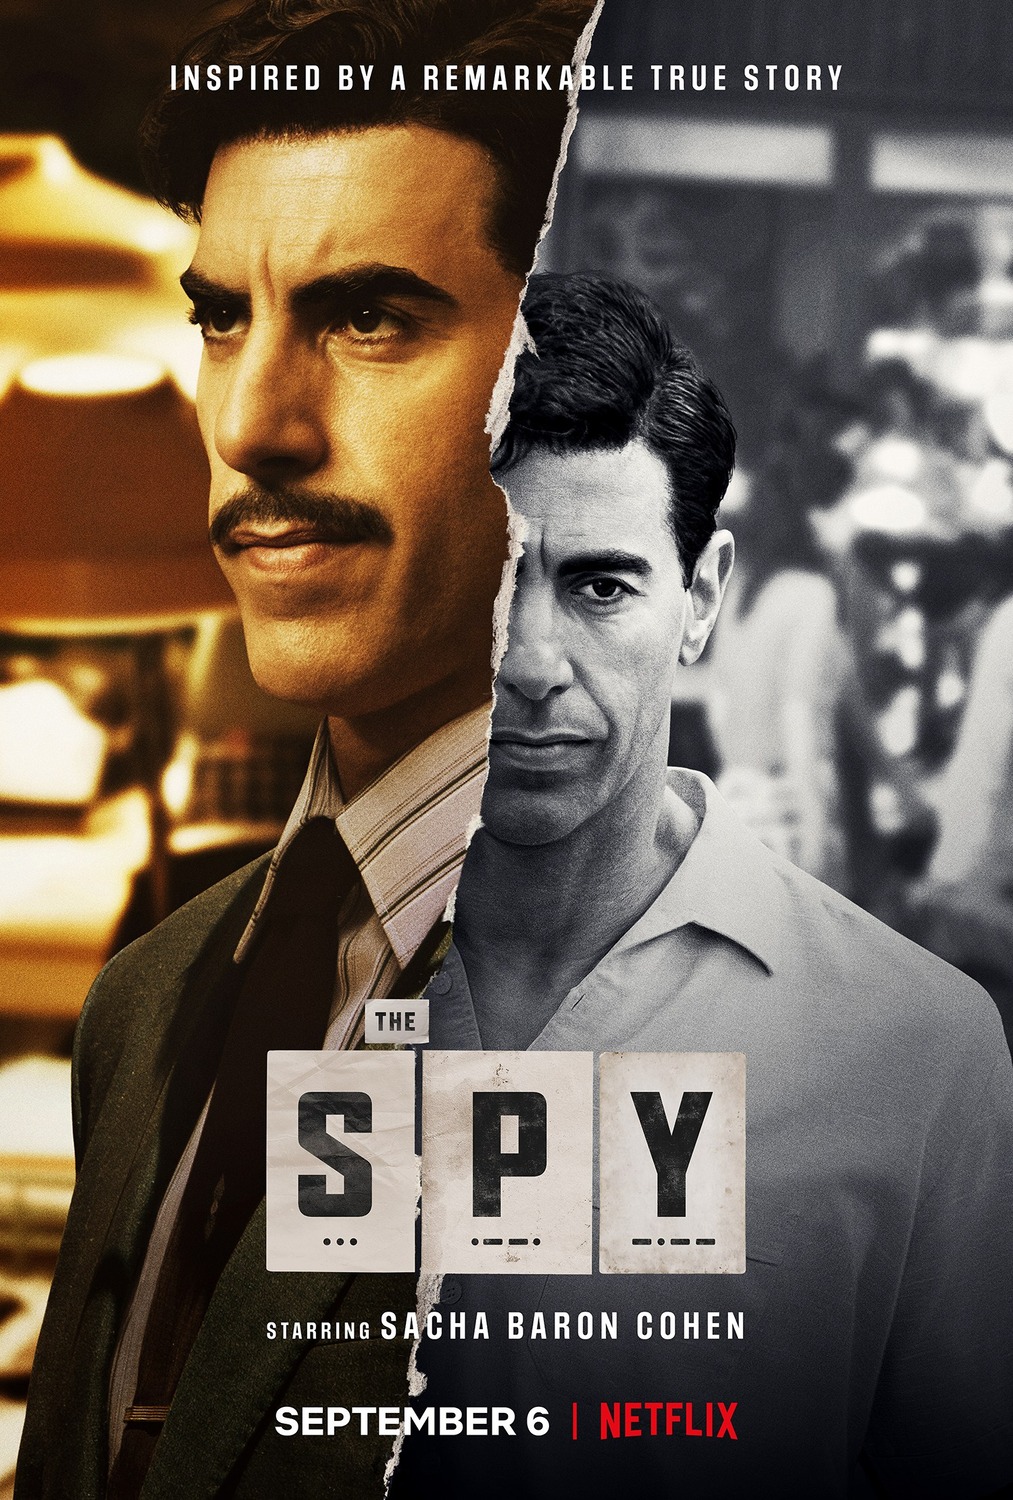 Netflix’s The Spy Review: Outstanding Performance by Sacha Baron 12